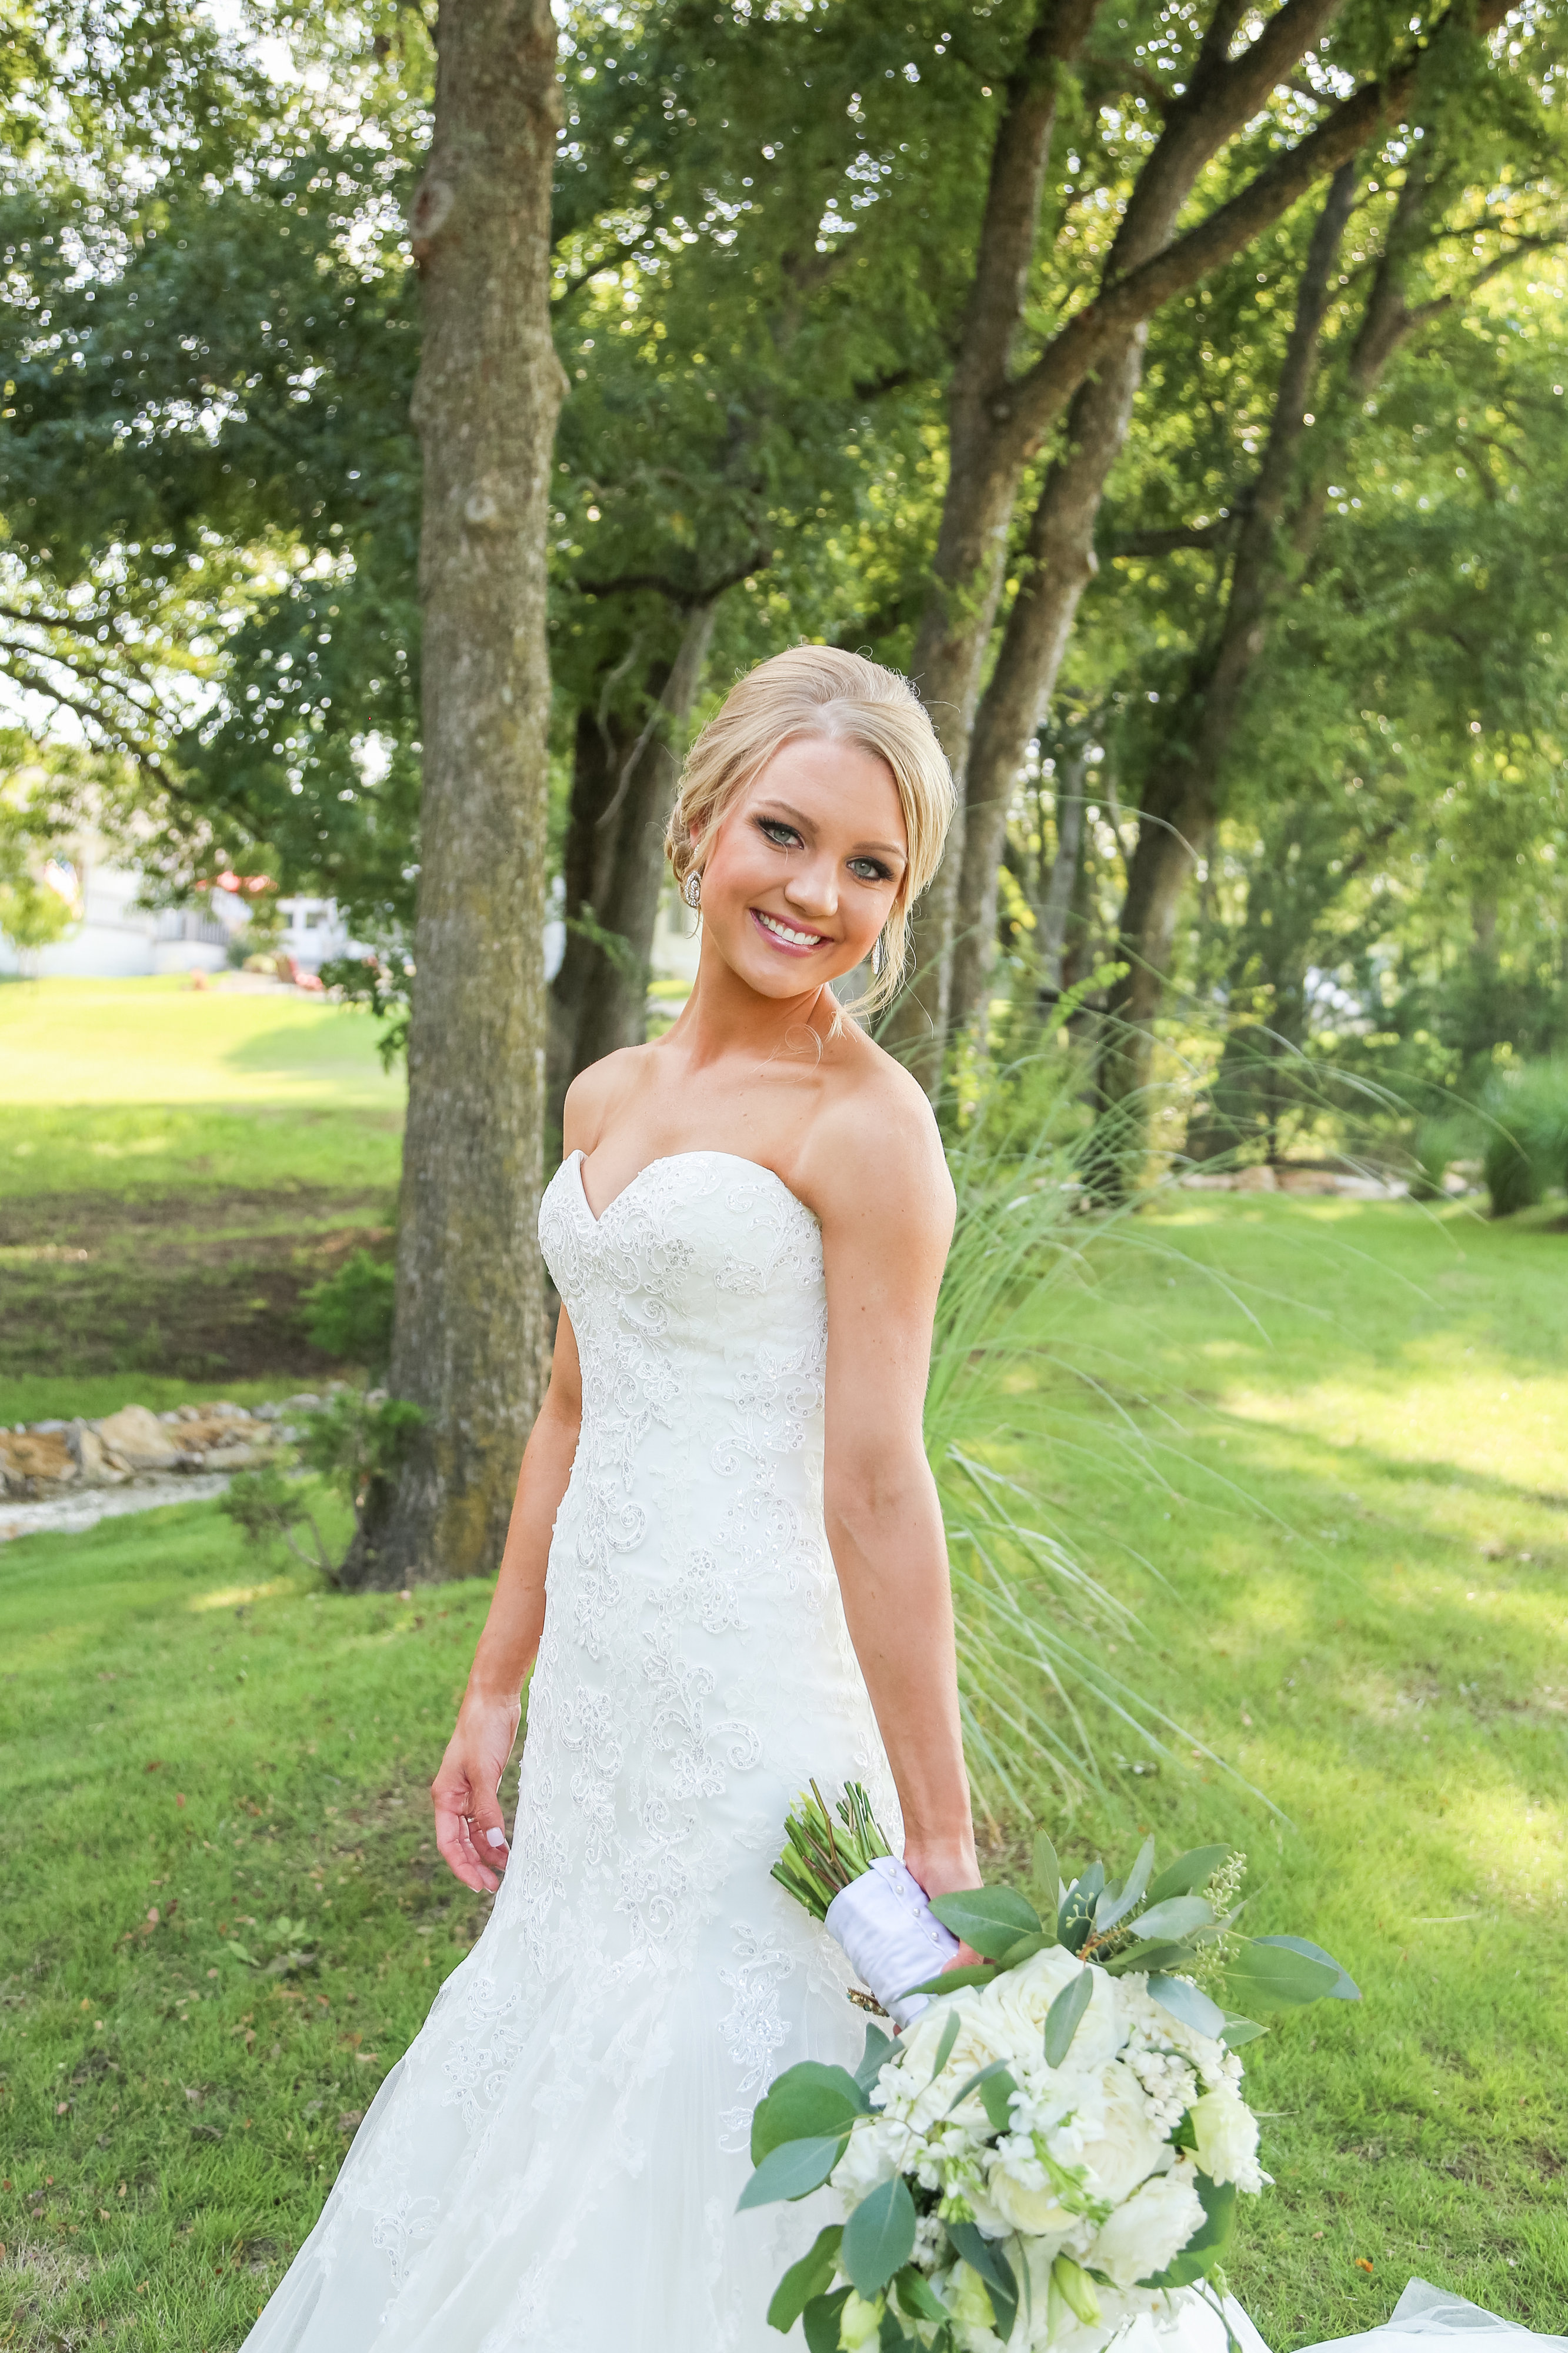 View More: http://kimhayesphotos.pass.us/curran-and-jaylan-wedding